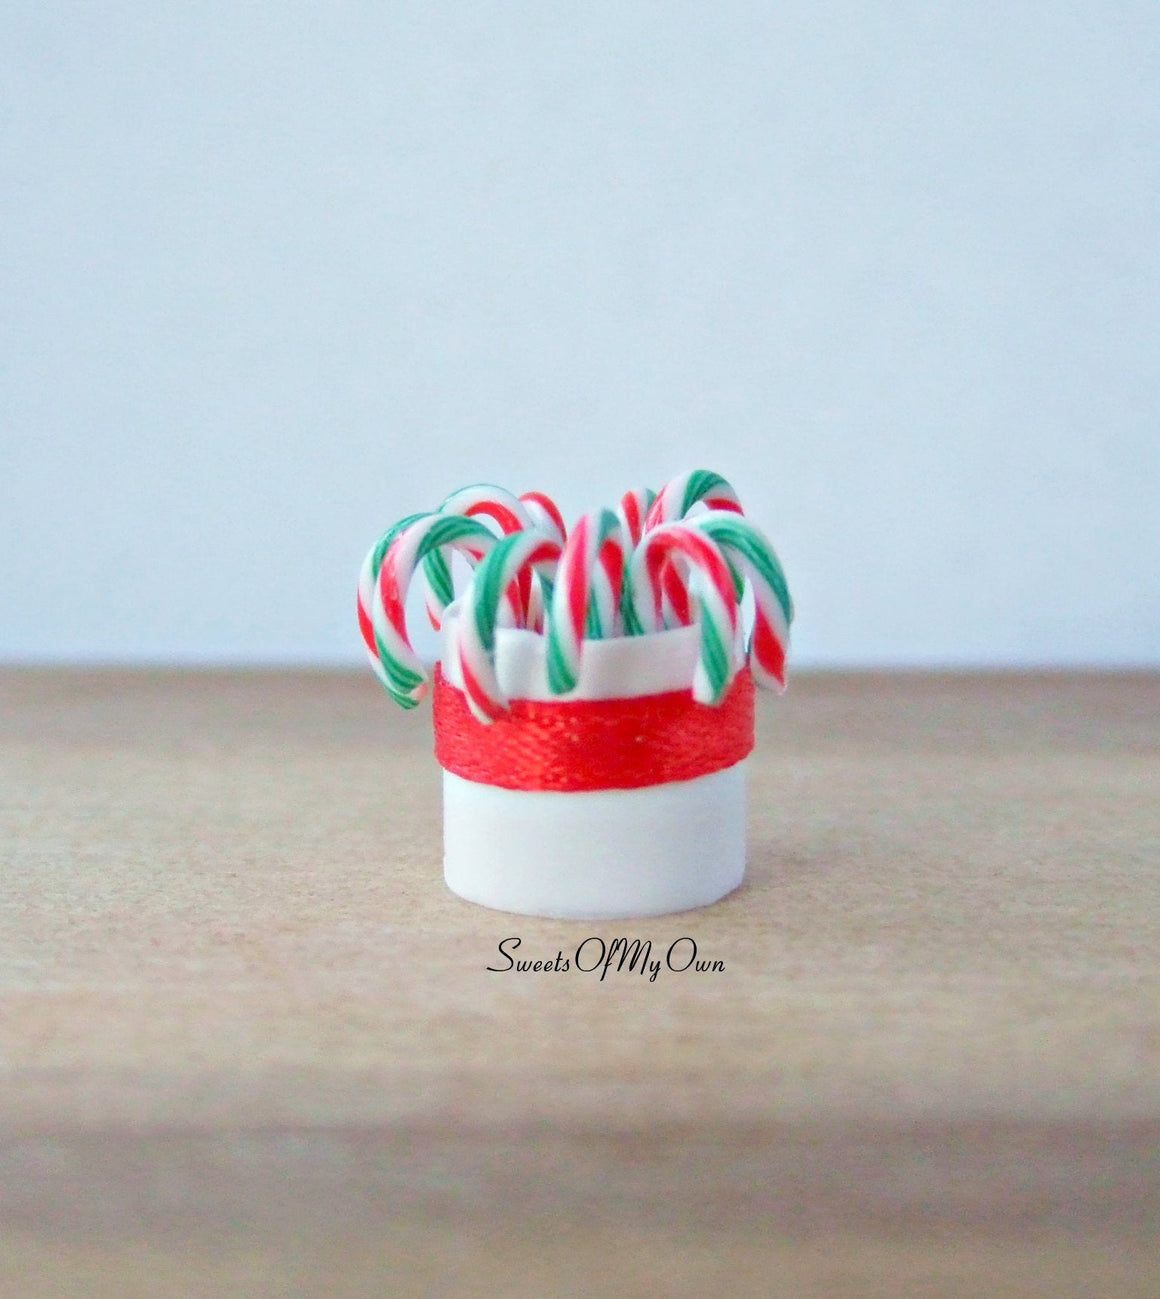 Miniature Candy Cane Display 1:12 Scale - SweetsOfMyOwn